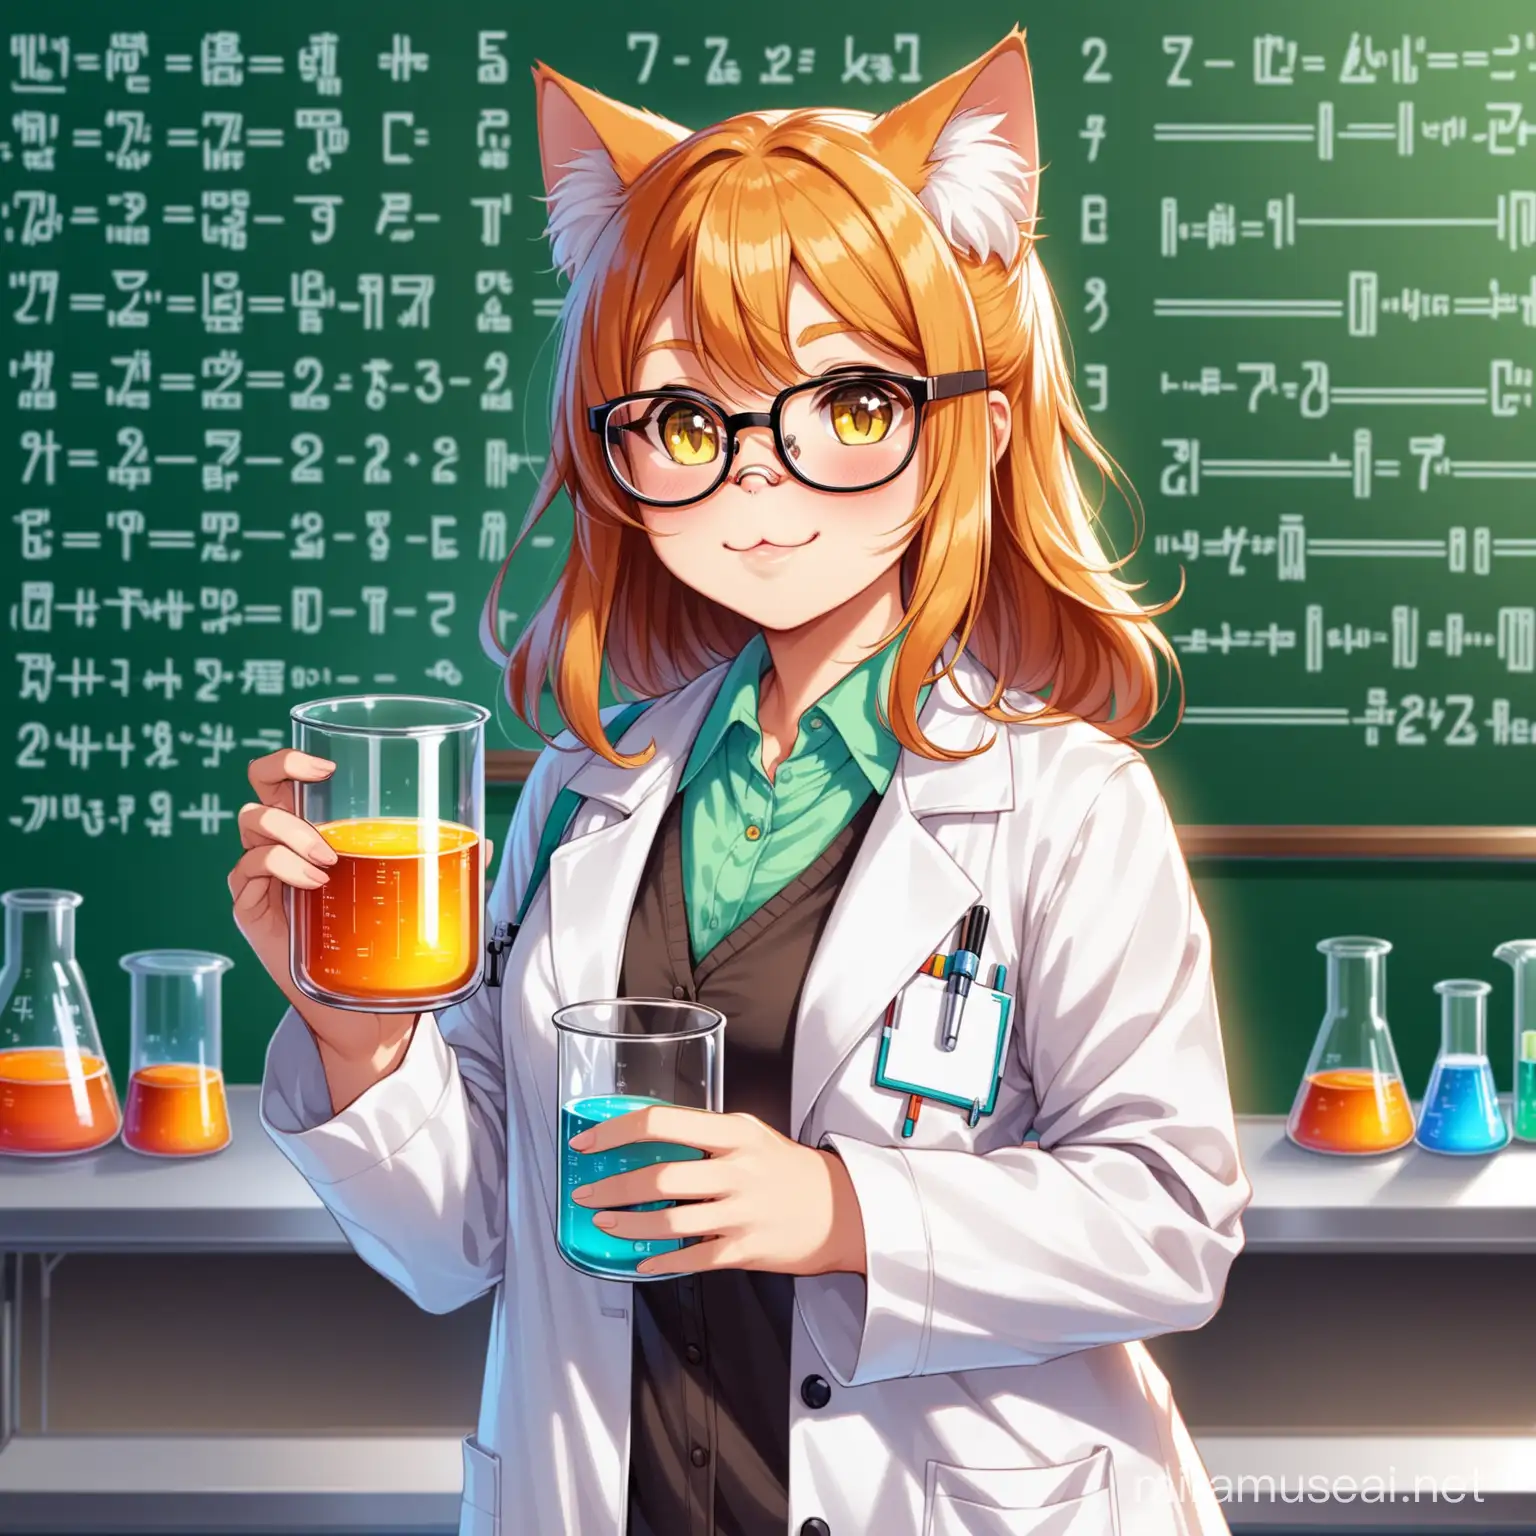 cat wearing nerd glasses, dressed in a lab coat, holding a glass beaker, Science calculations in background.